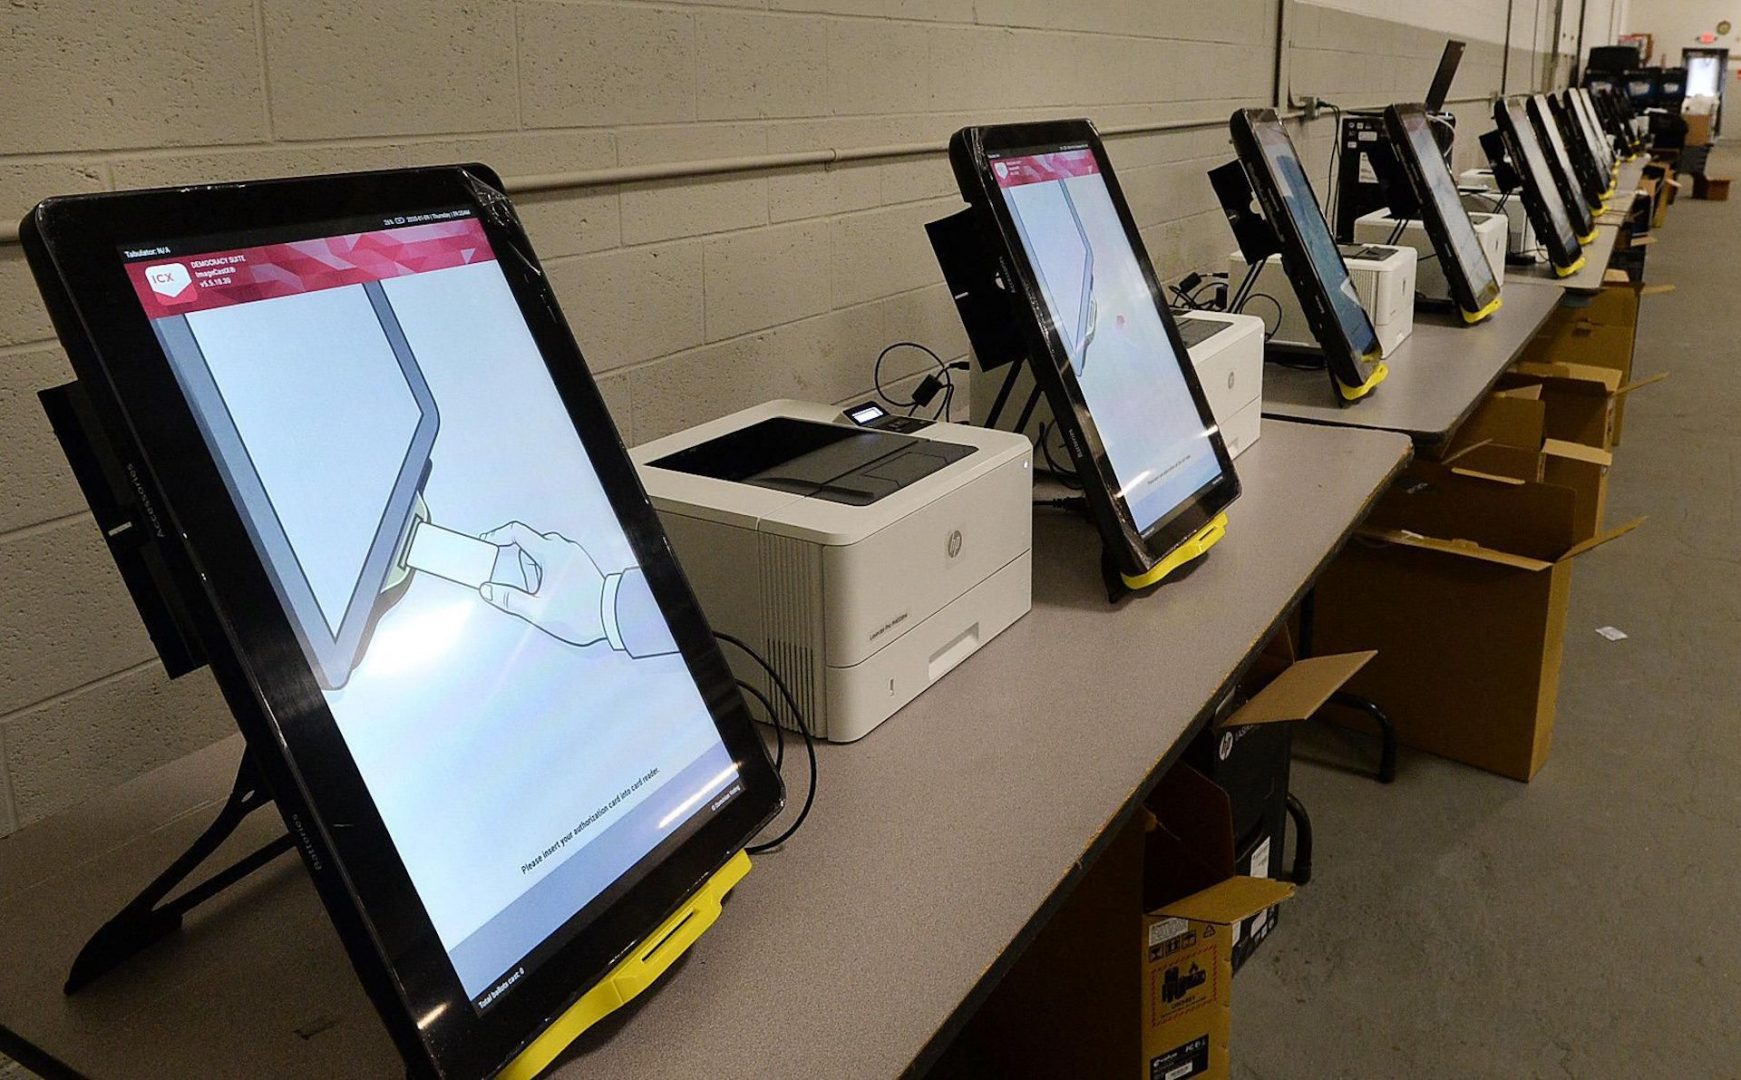 Erie County is one of 14 Pennsylvania counties that use machines from Dominion Voting Systems.